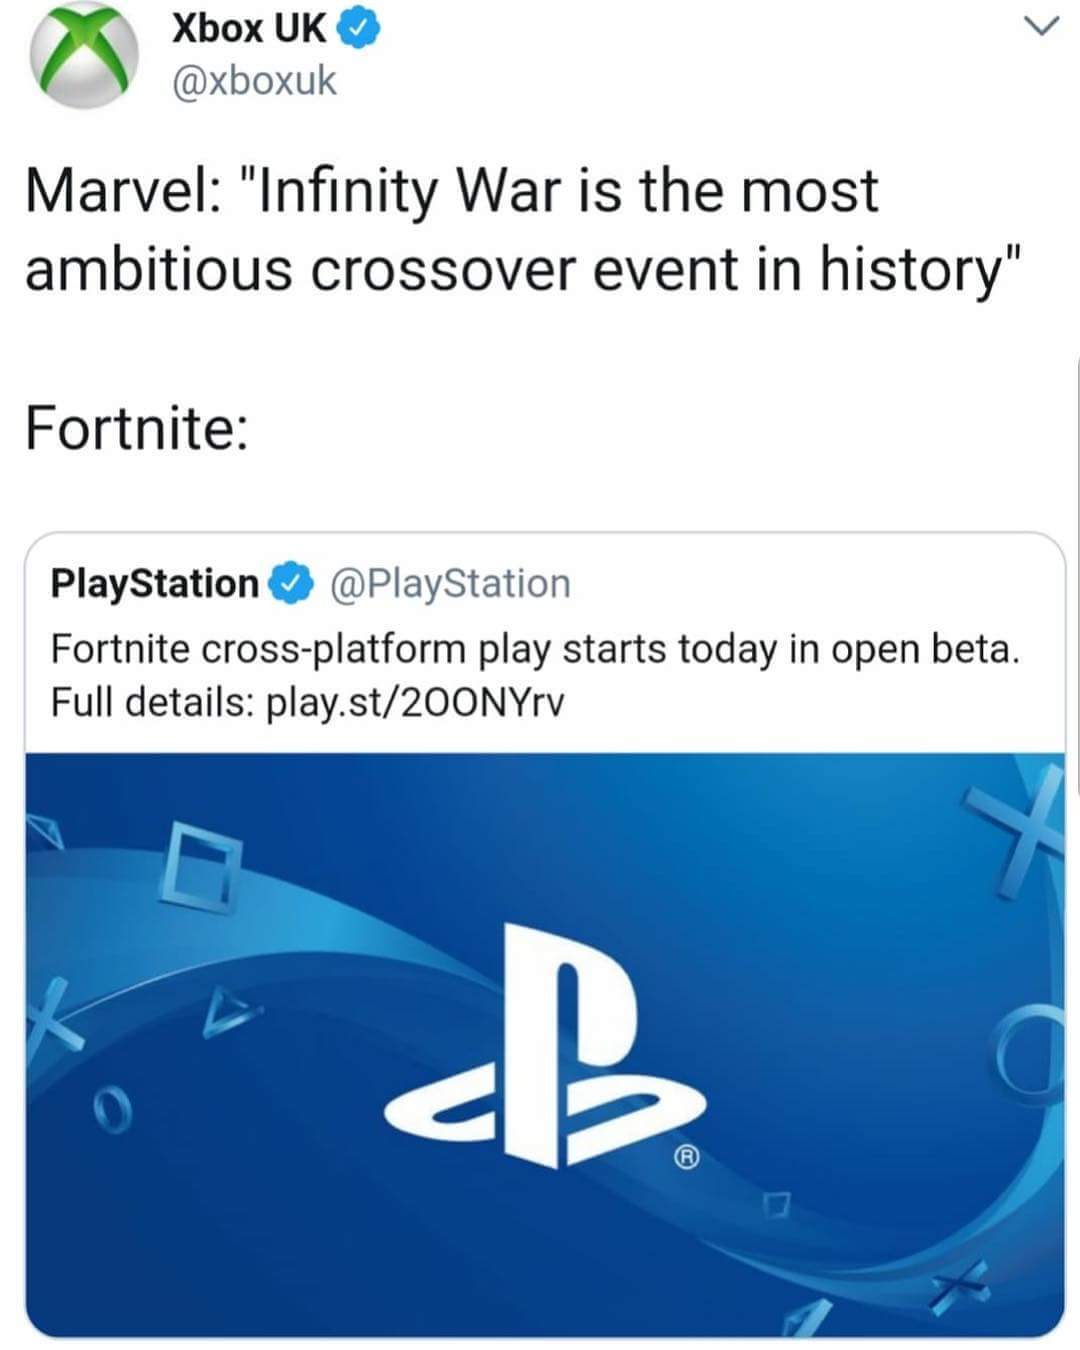 Is this an actual tweet by xbox - meme